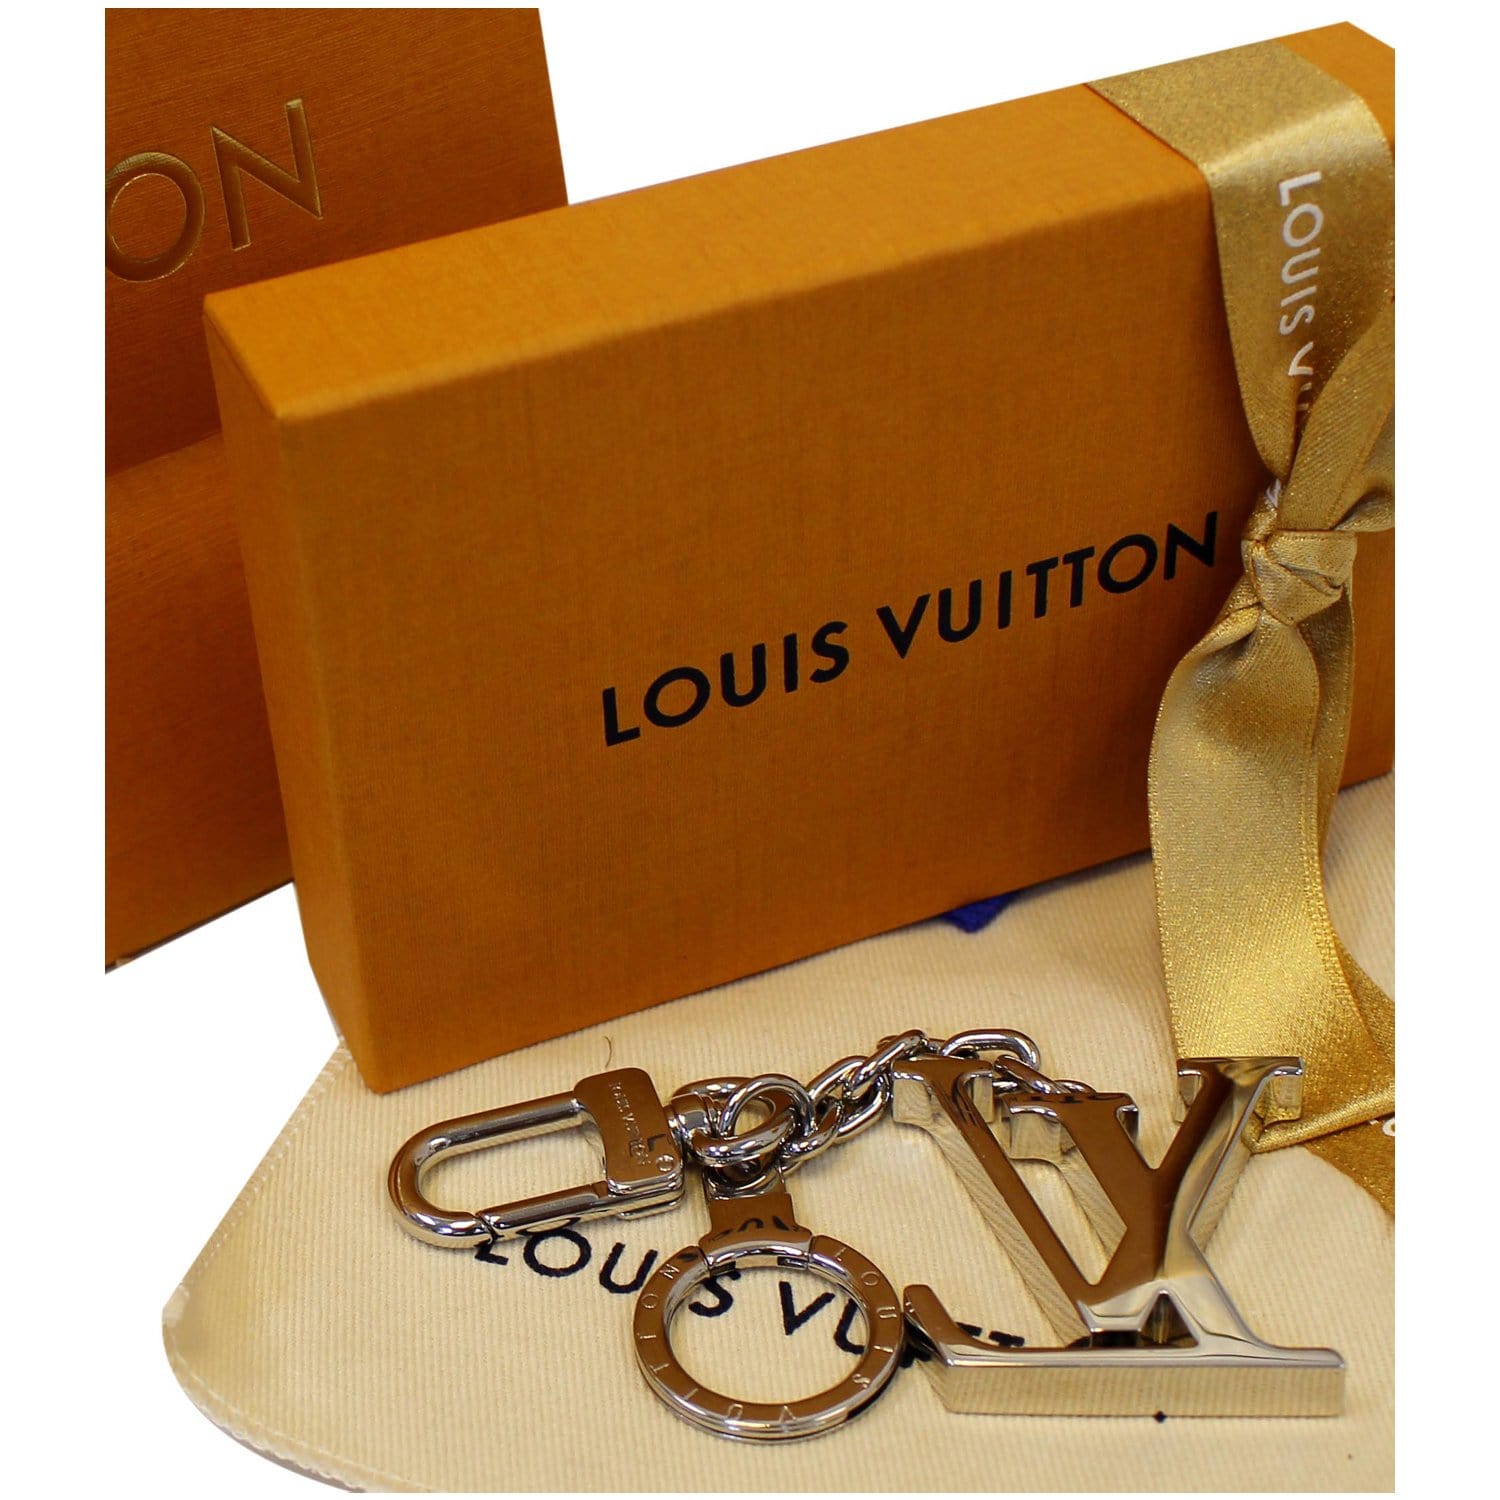 Louis Vuitton LV Prism ID Holder Bag Charm and Key Holder, Silver, One Size